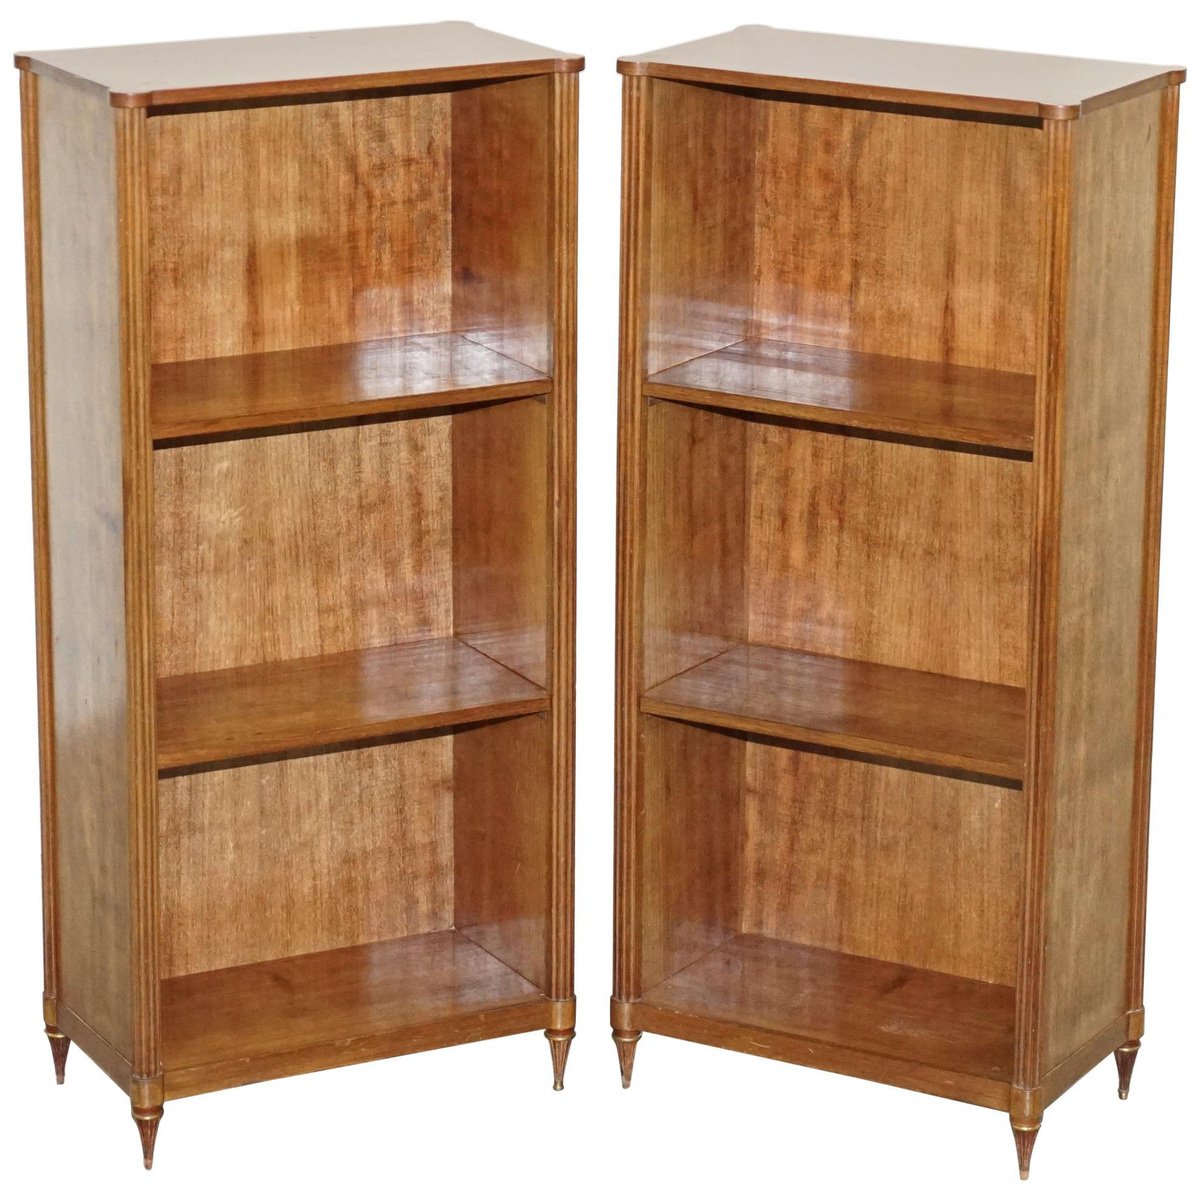 early 19th century french hardwood and bronze bookcases set of 2 GZP-1006702